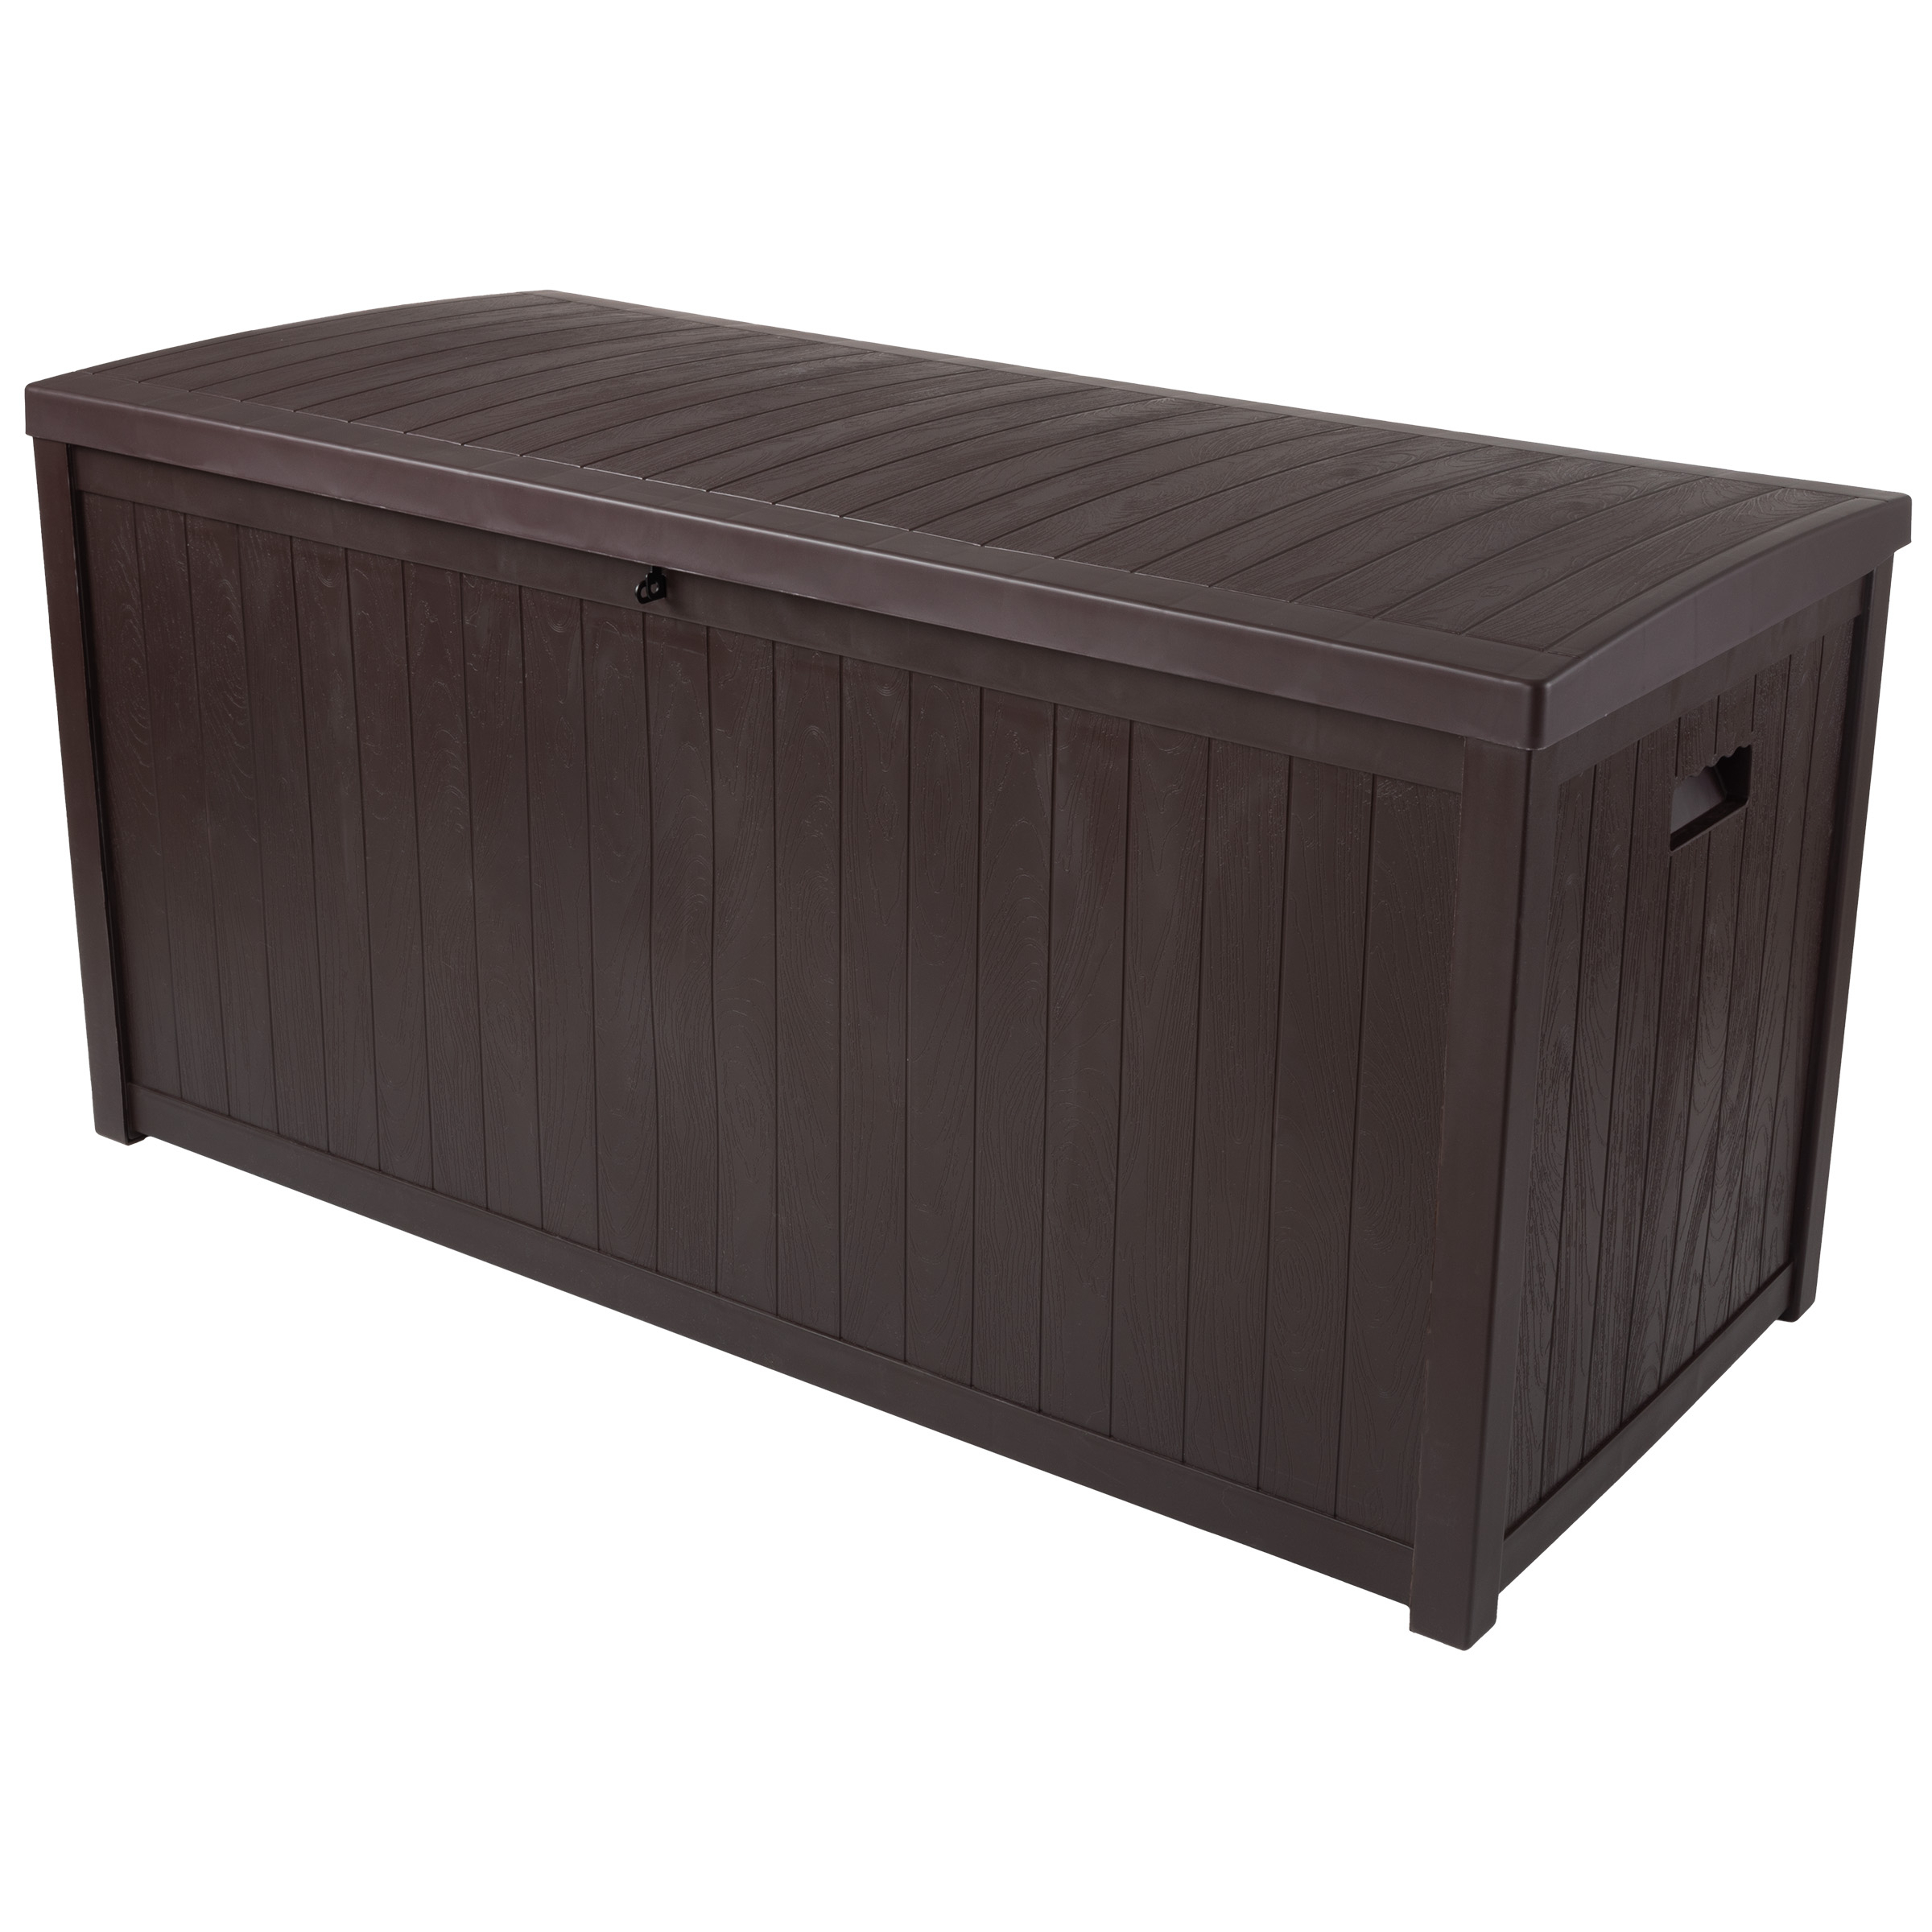 Outdoor Indoor 113 Gallon Storage Container Resin Deck Box 22 X 51.5 Inch - Brown